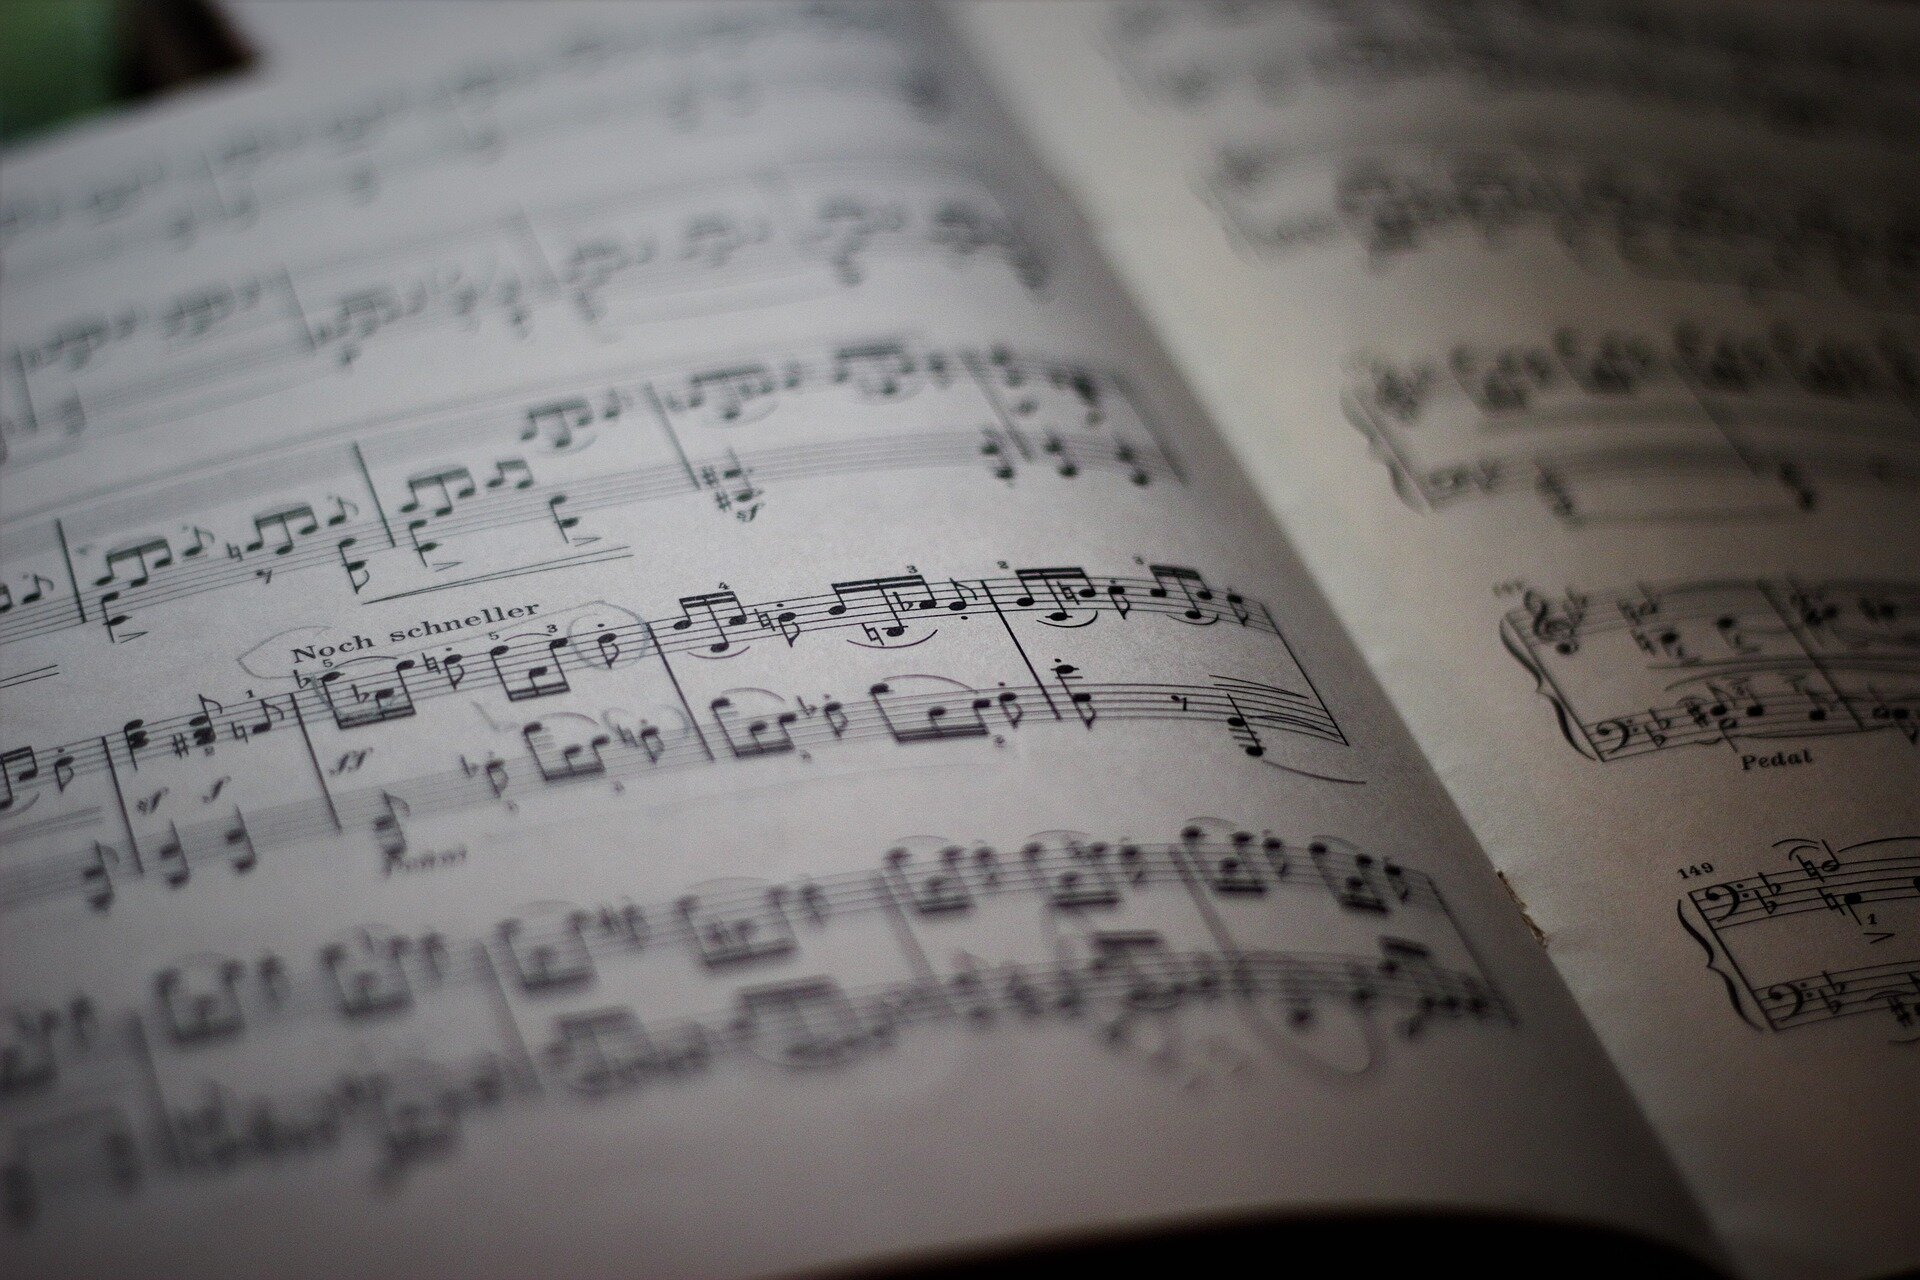 Researchers develop real-time lyric generation technology to inspire song writing